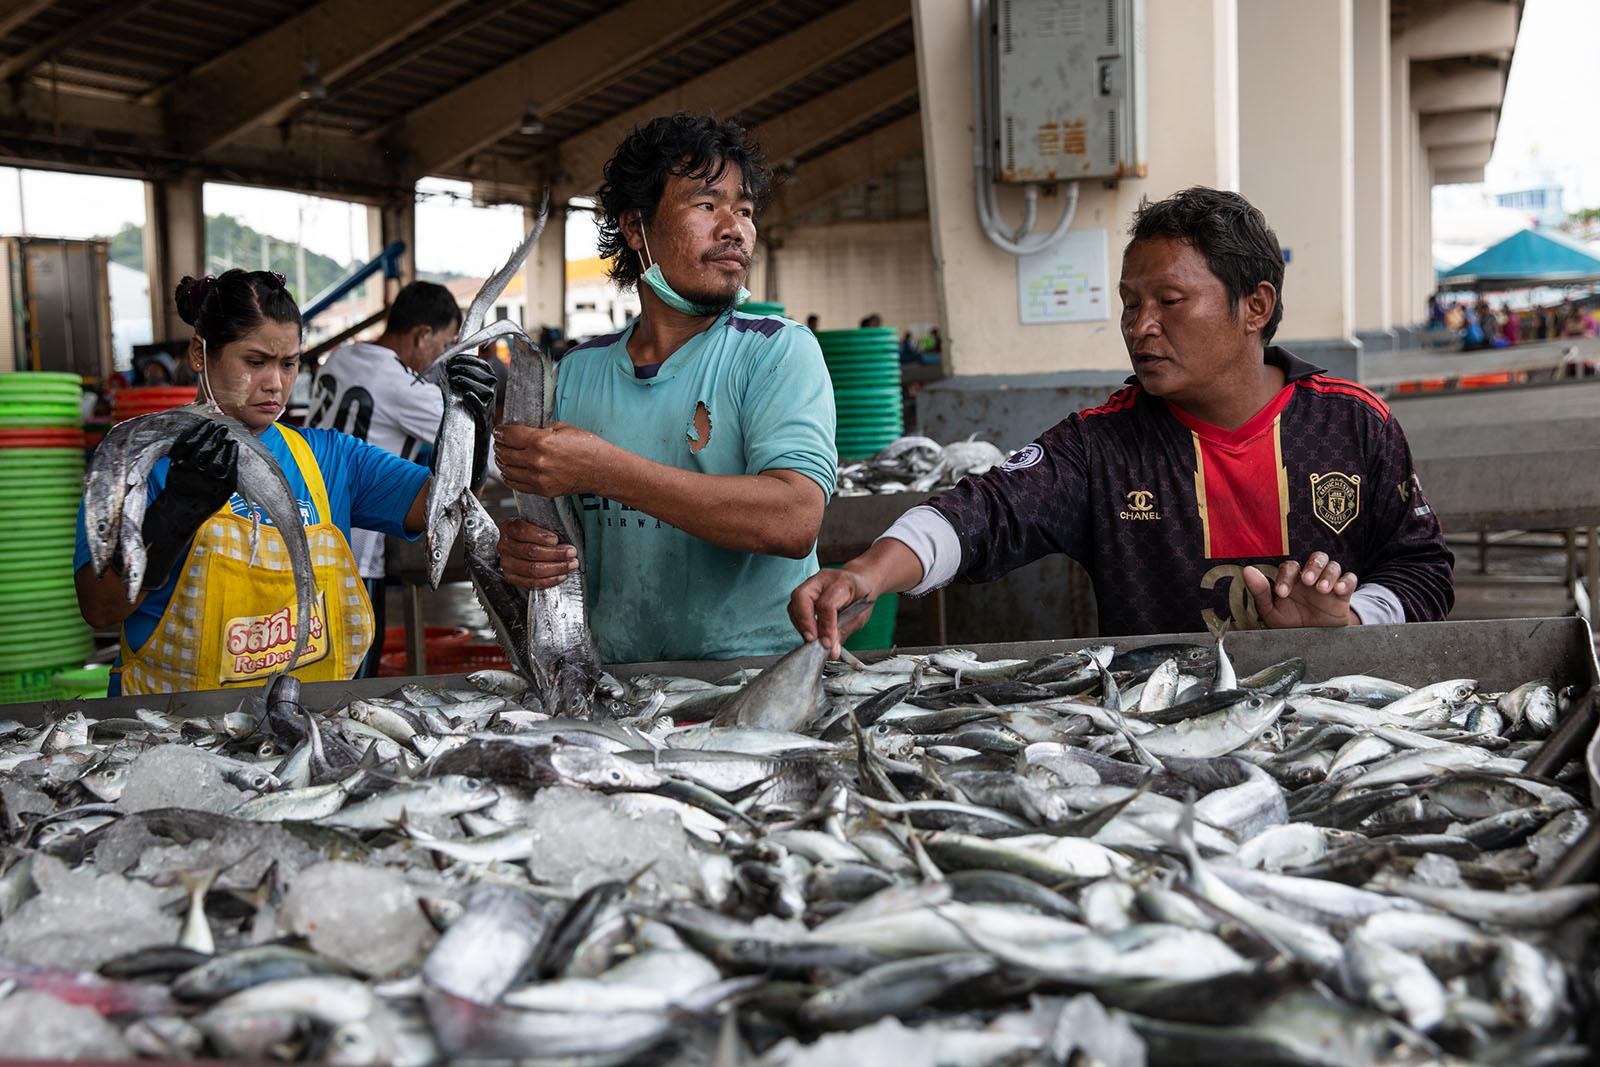 LIFE ON THE OTHER SIDE - Phuket - Migrant workers sort recently caught fish at...